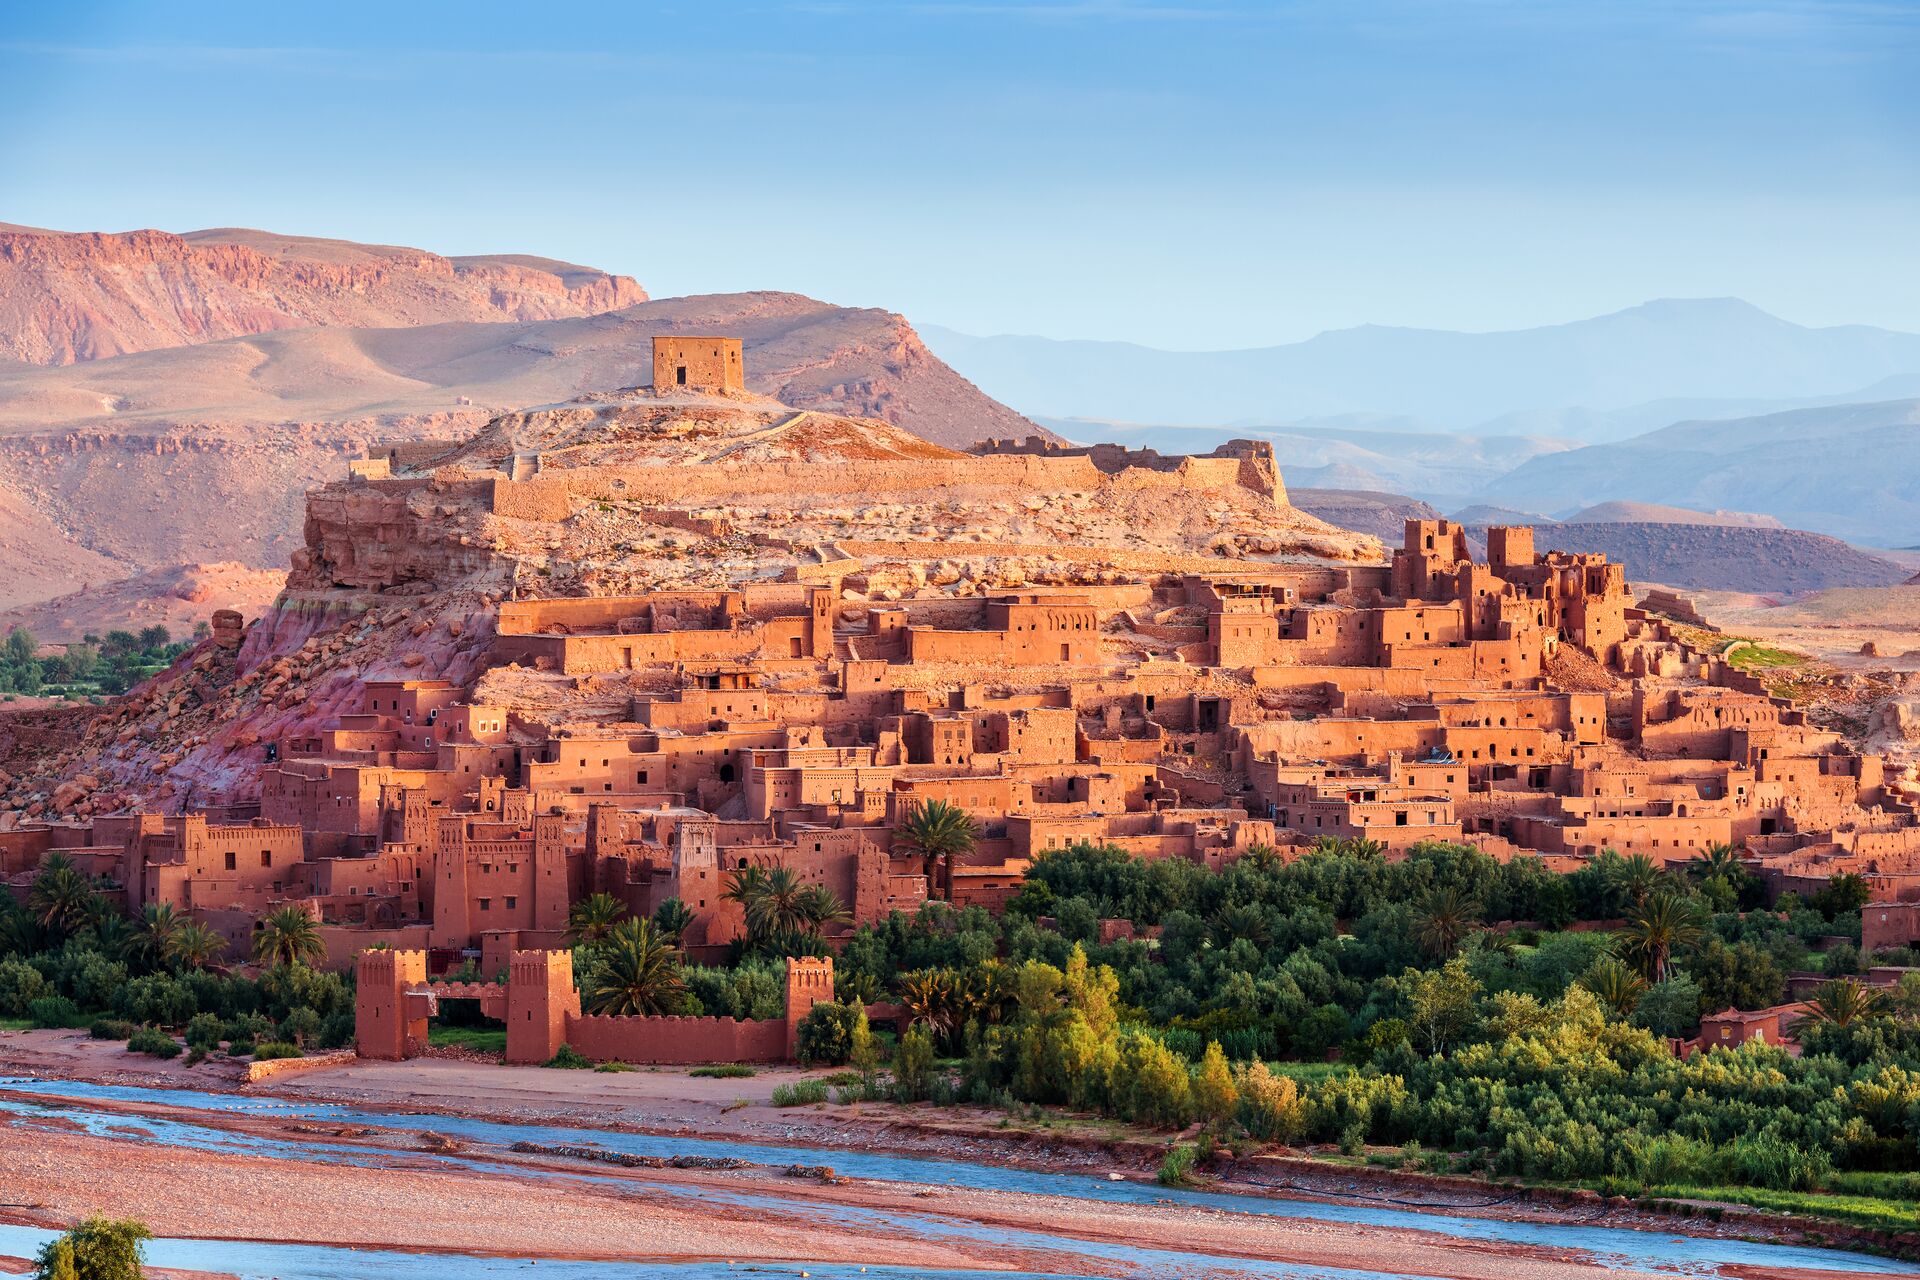 Red stone houses of the Ait Ben Haddou Kasbah sit in a red sand valley with a bright blue sky and red mountains in the background